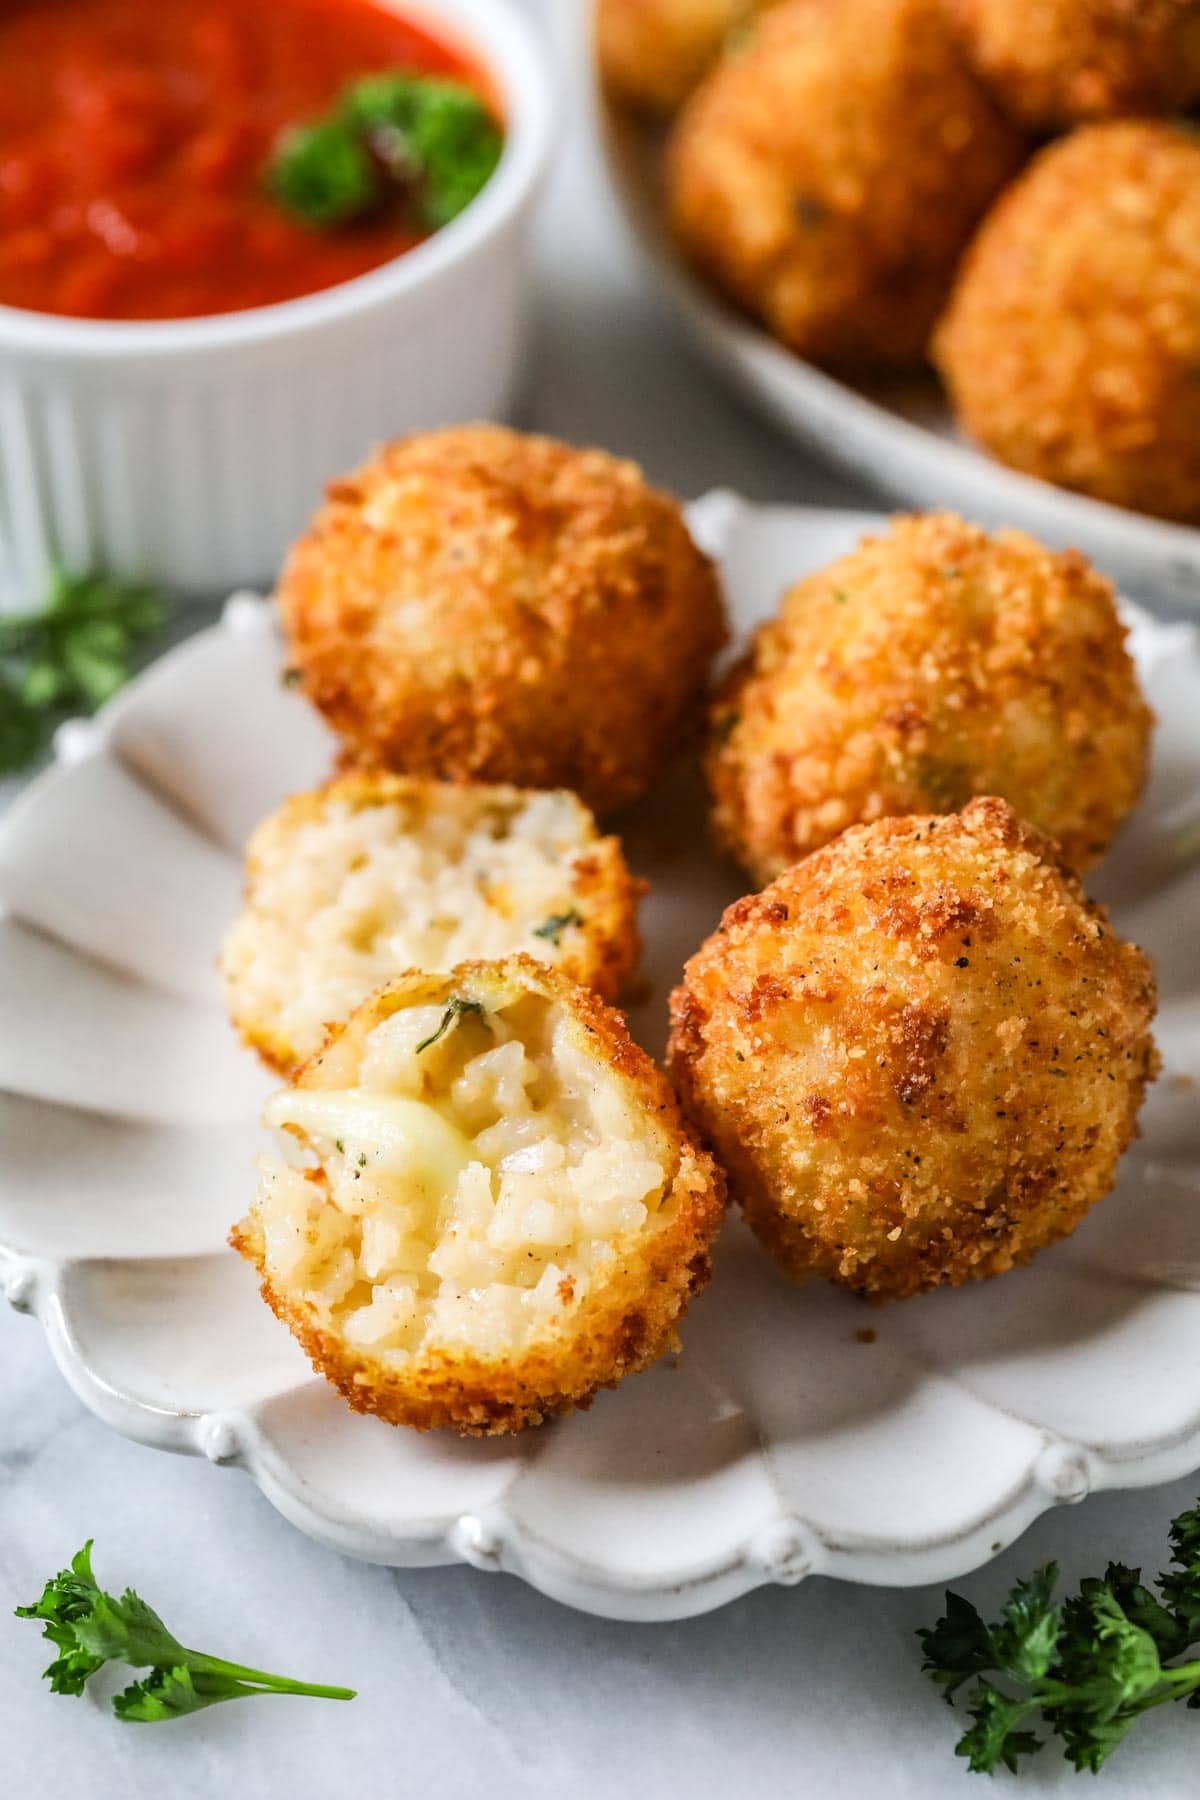 Arancini on a plate with one cut in half to show a cheesy filling.